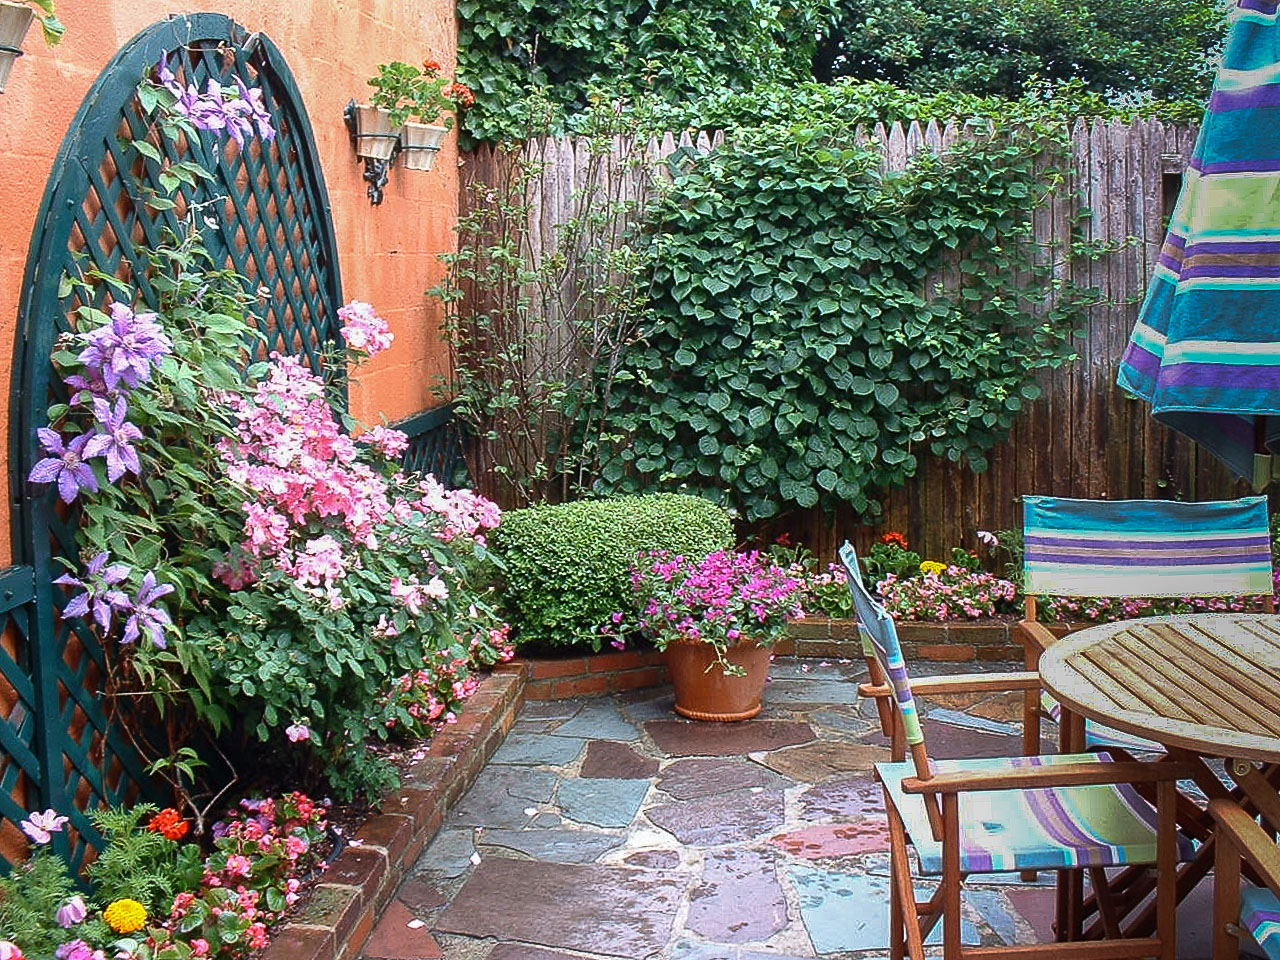 The use of vertical spaces gives opportunity to add more color and texture to this pocket patio garden. : Garden Details : CITYSCAPES® Landscaping LLC